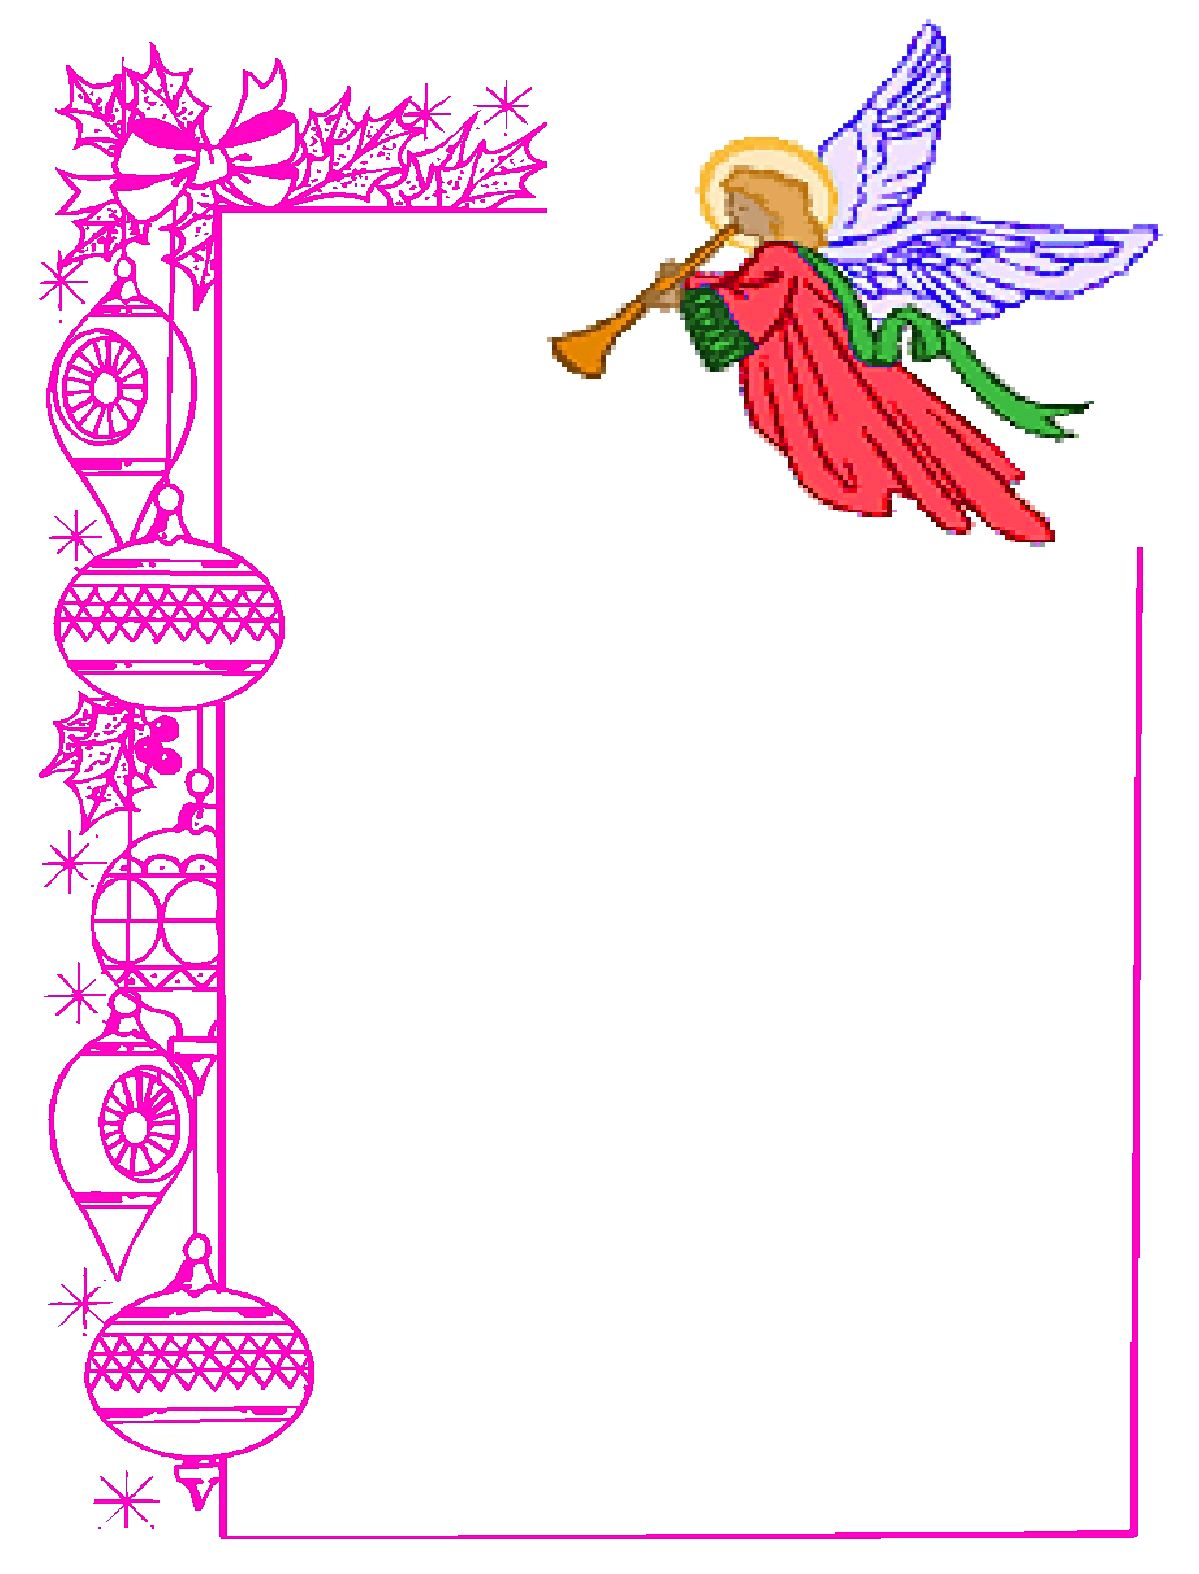 christian-images-in-my-treasure-box-angel-borders-frames-and